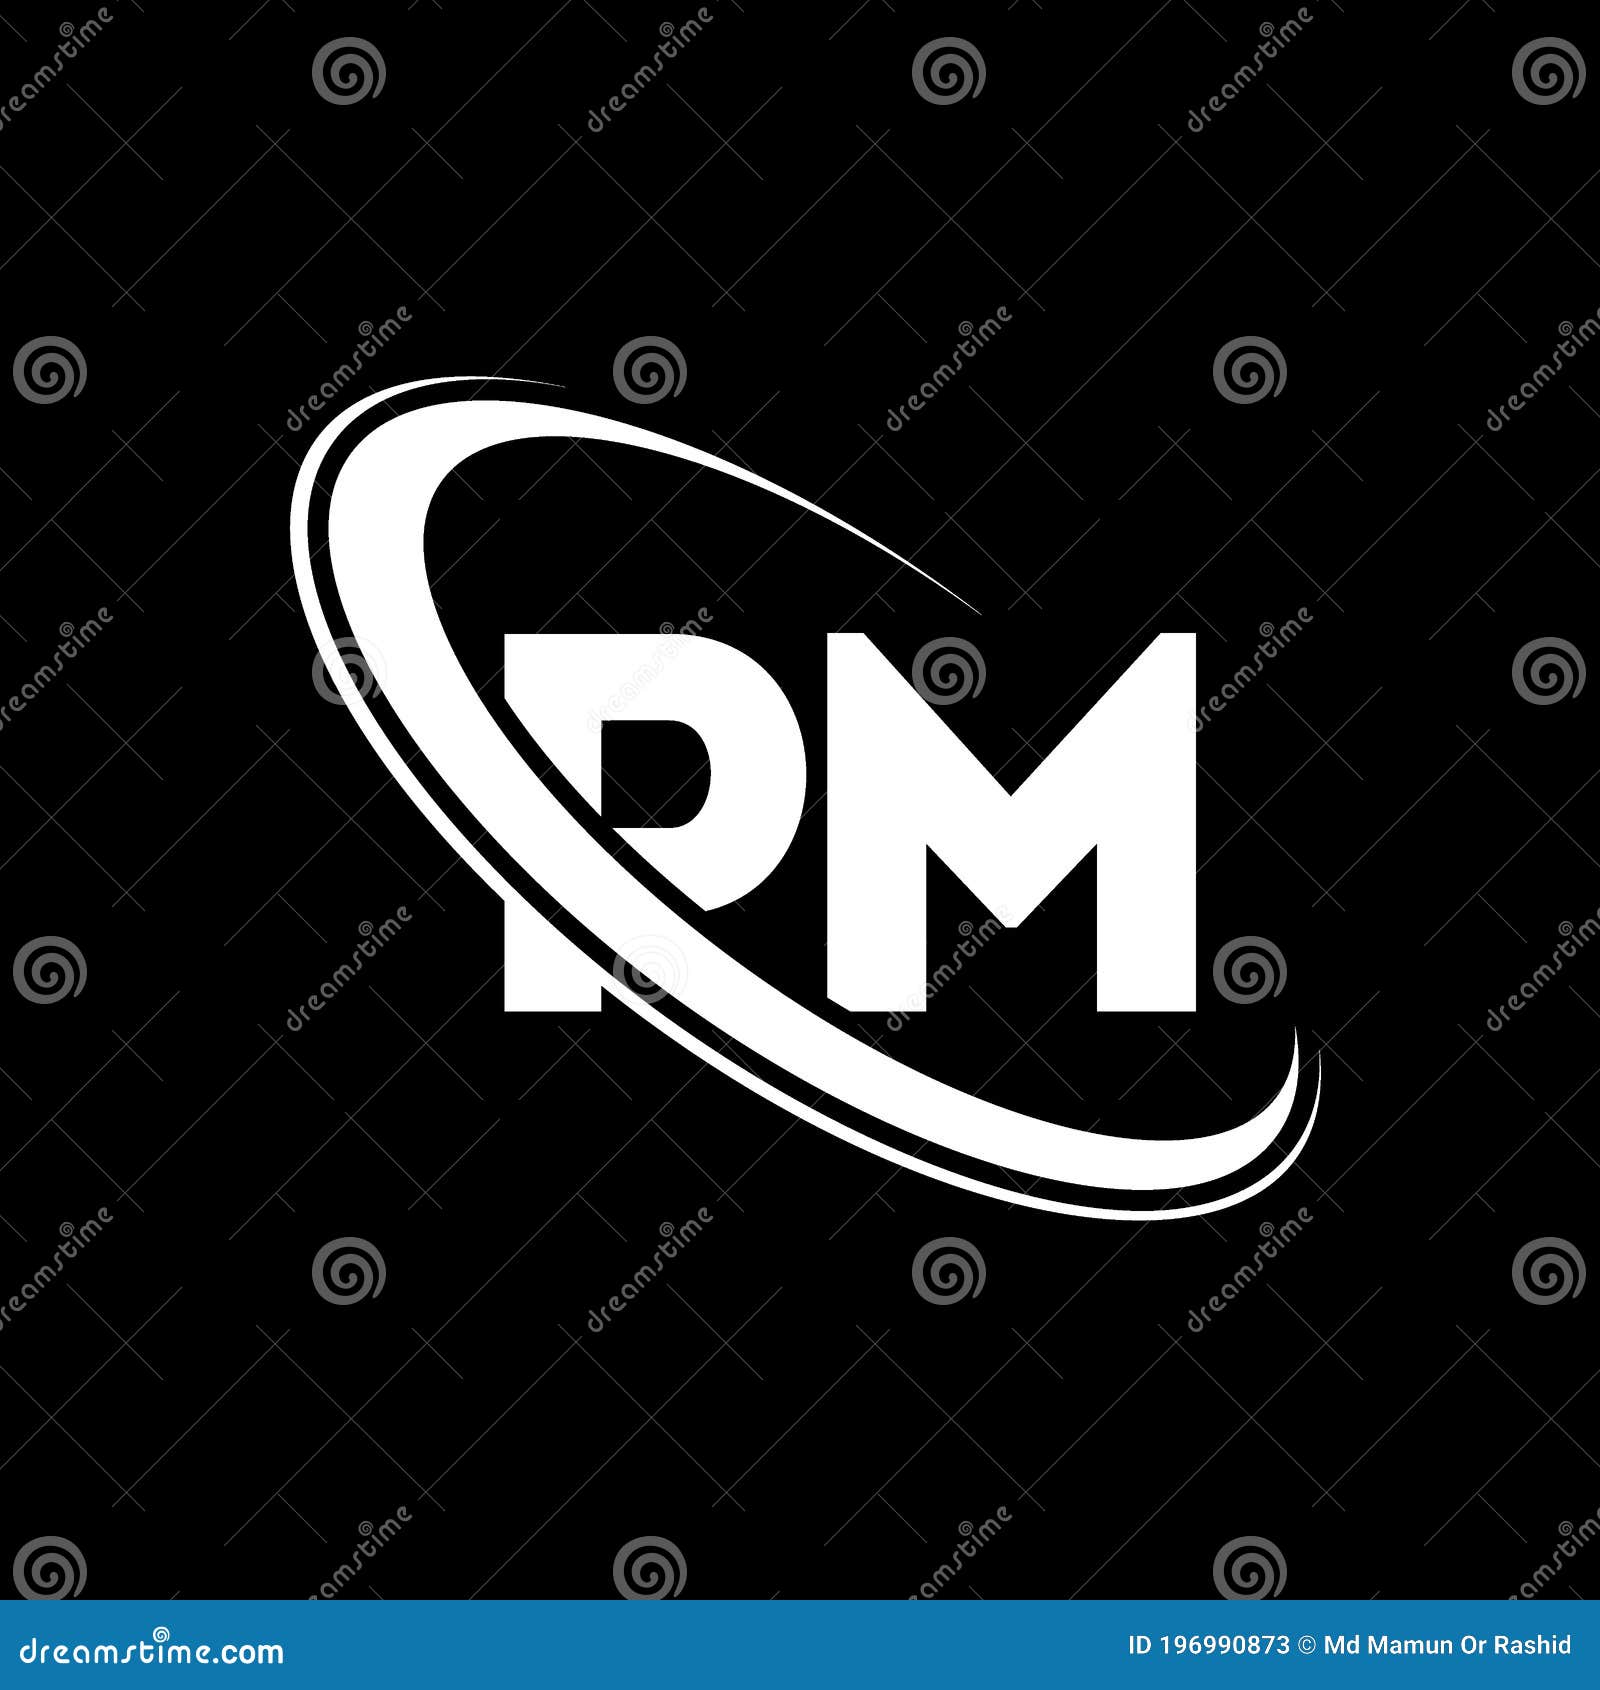 initial letter pm logo